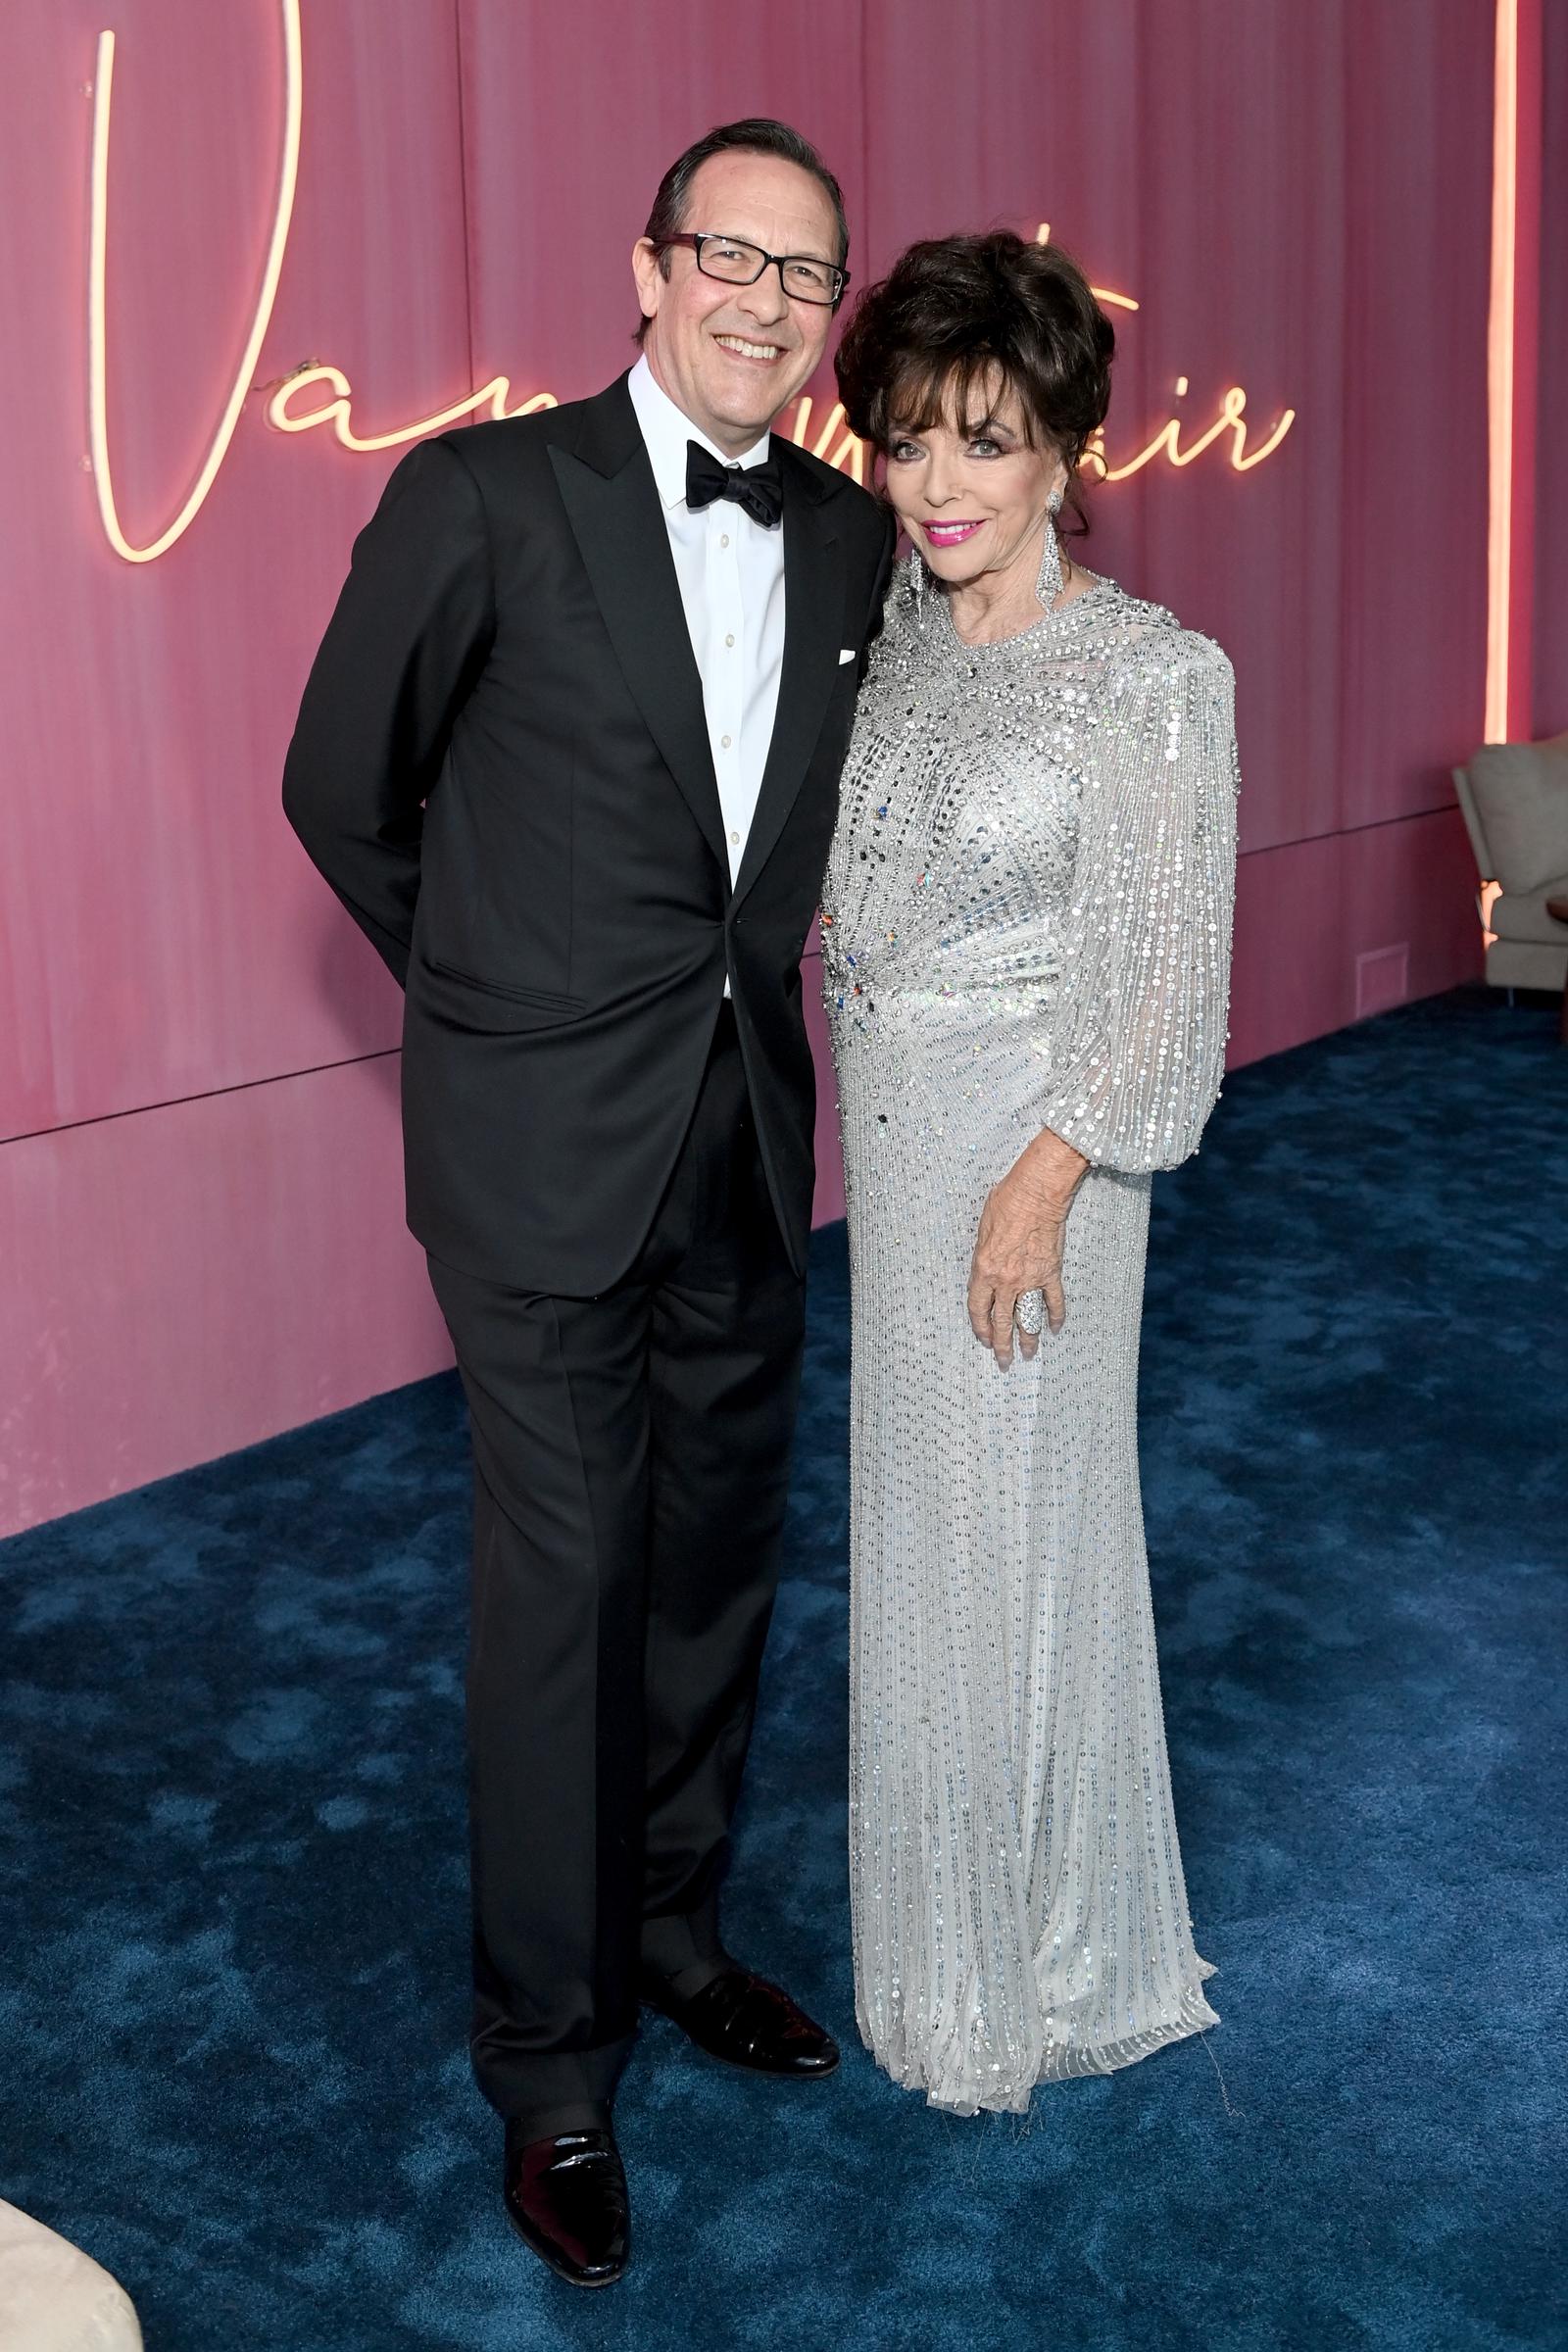 Percy Gibson and Joan Collins attend the Vanity Fair Oscar Party hosted by Radhika Jones in Beverly Hills, California, on March 27, 2022. | Source: Getty Images